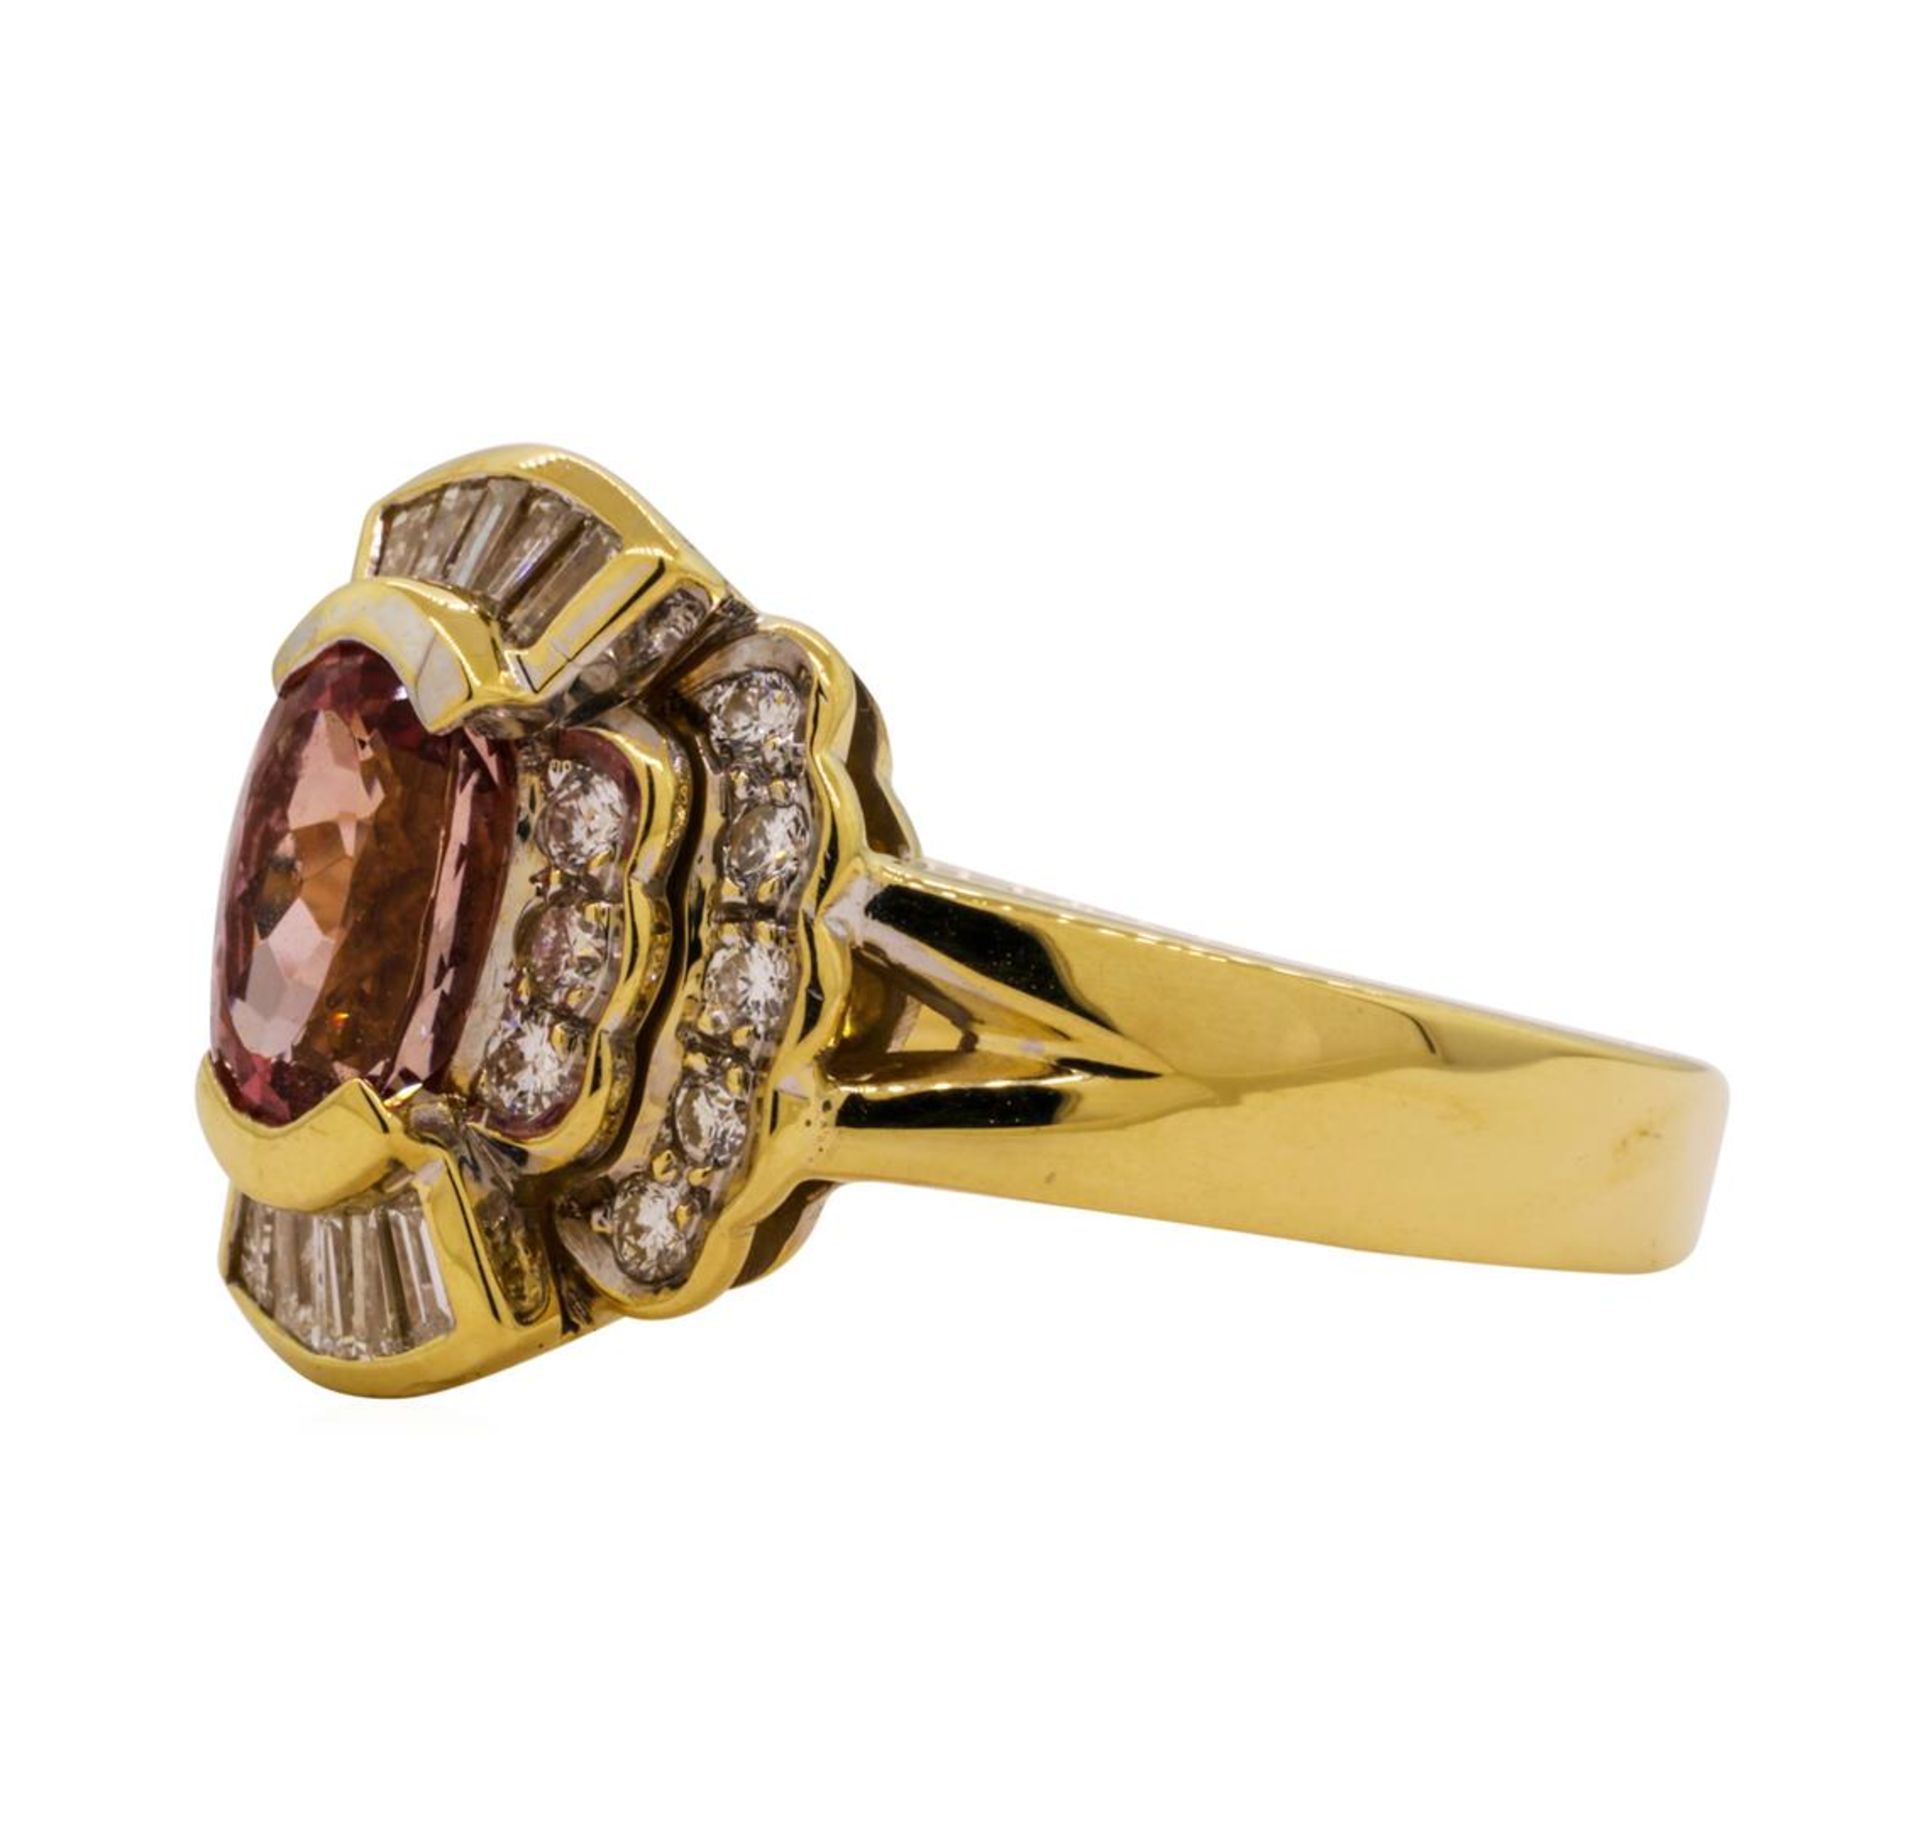 1.82 ctw Pink Spinel and Diamond Ring - 18KT Yellow Gold - Image 2 of 5